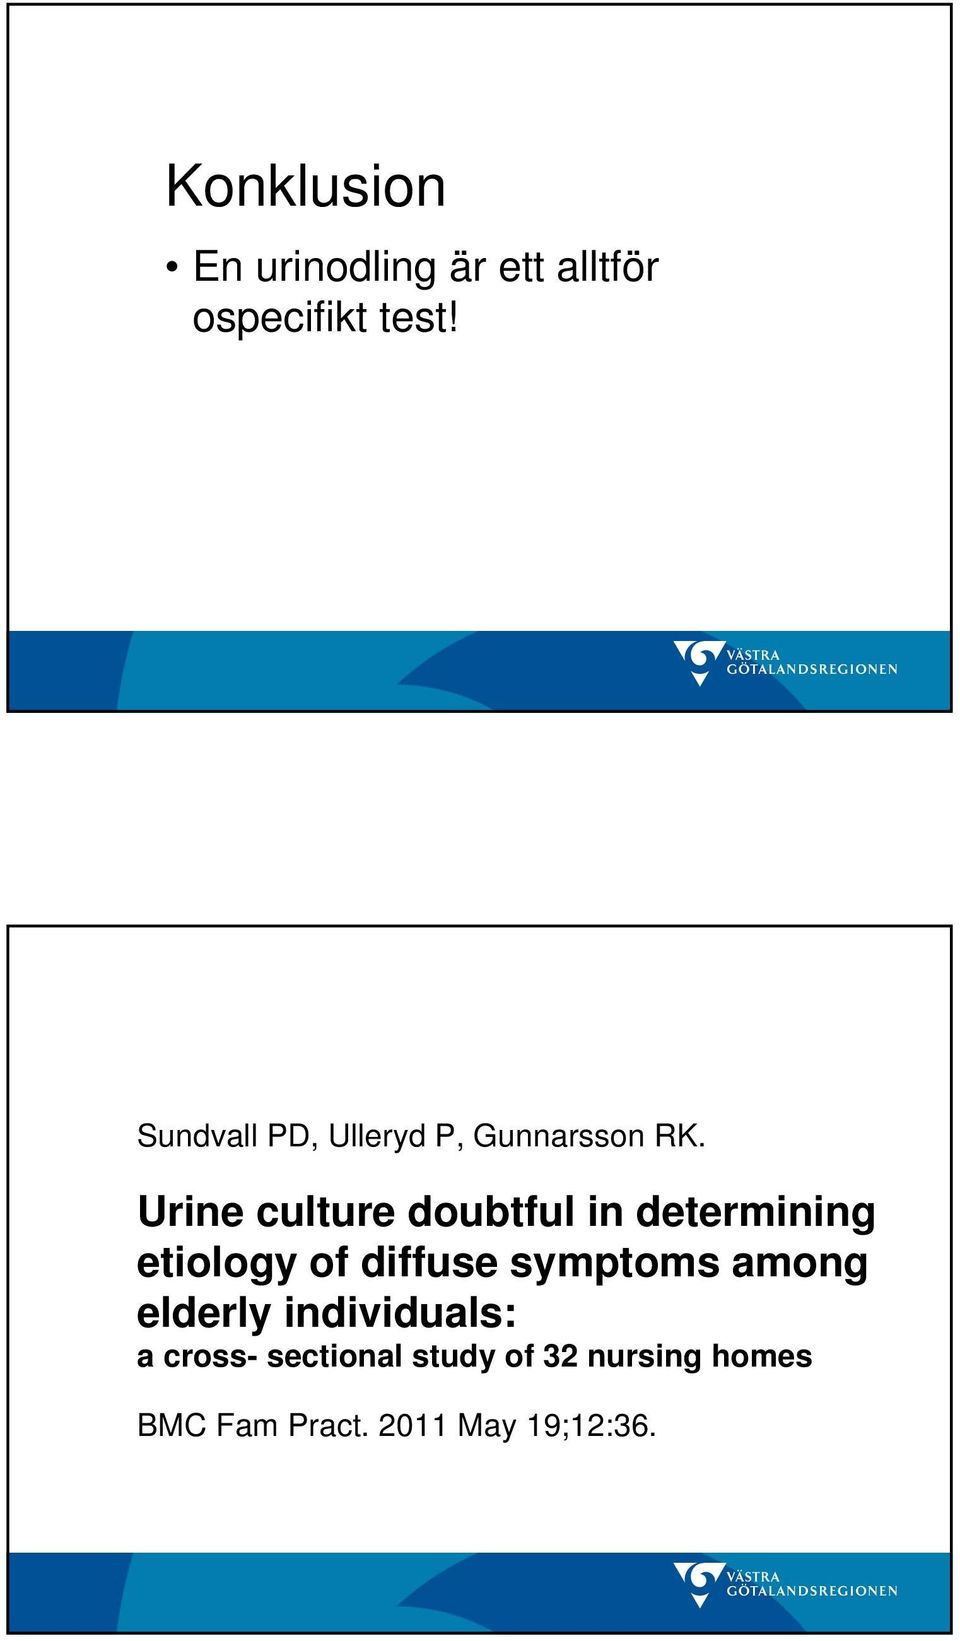 Urine culture doubtful in determining etiology of diffuse symptoms